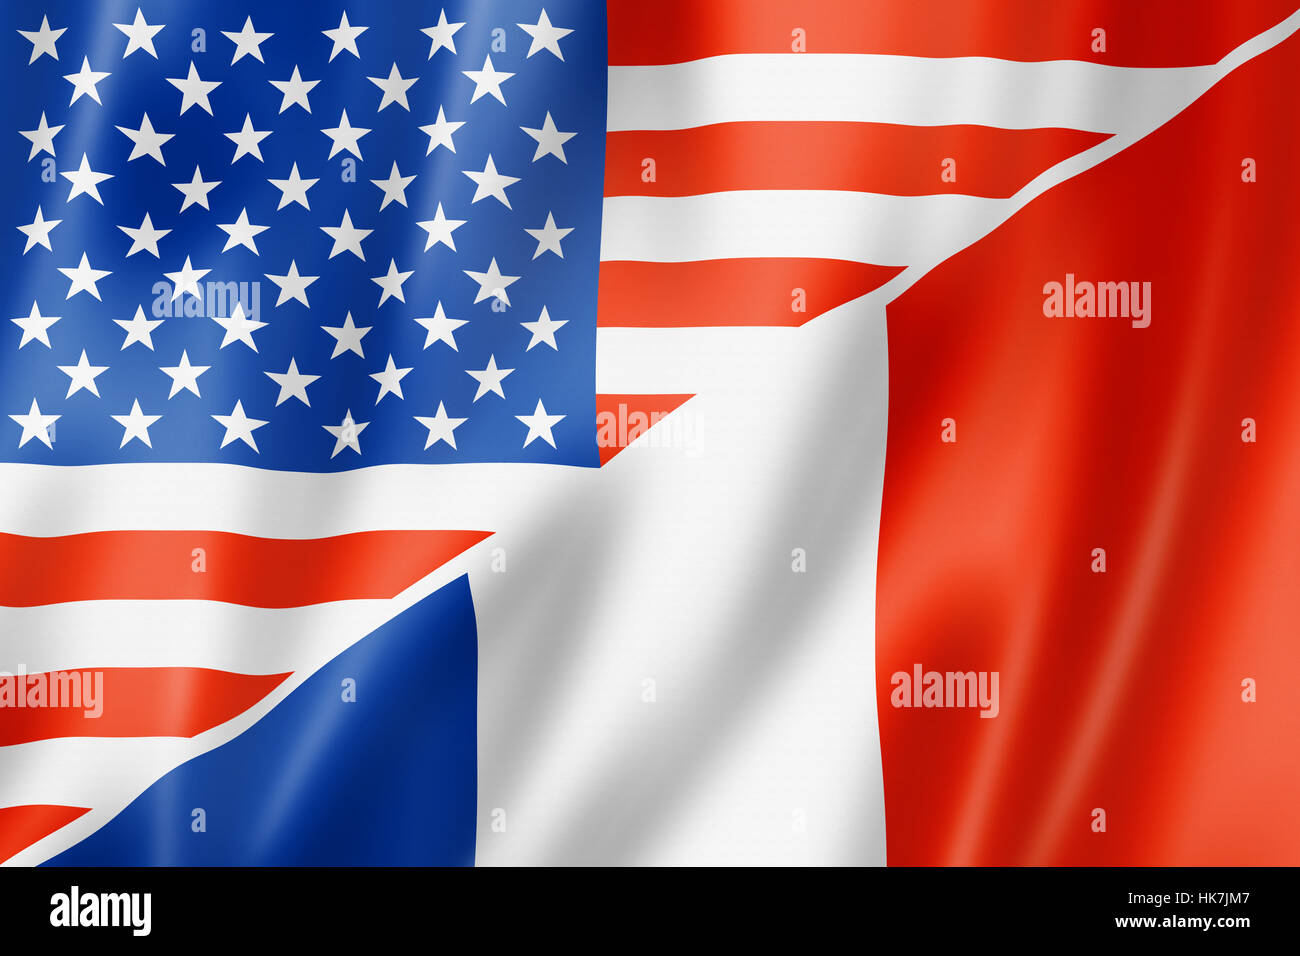 usa, france, flag, french, travel, model, design, project, concept, plan, Stock Photo